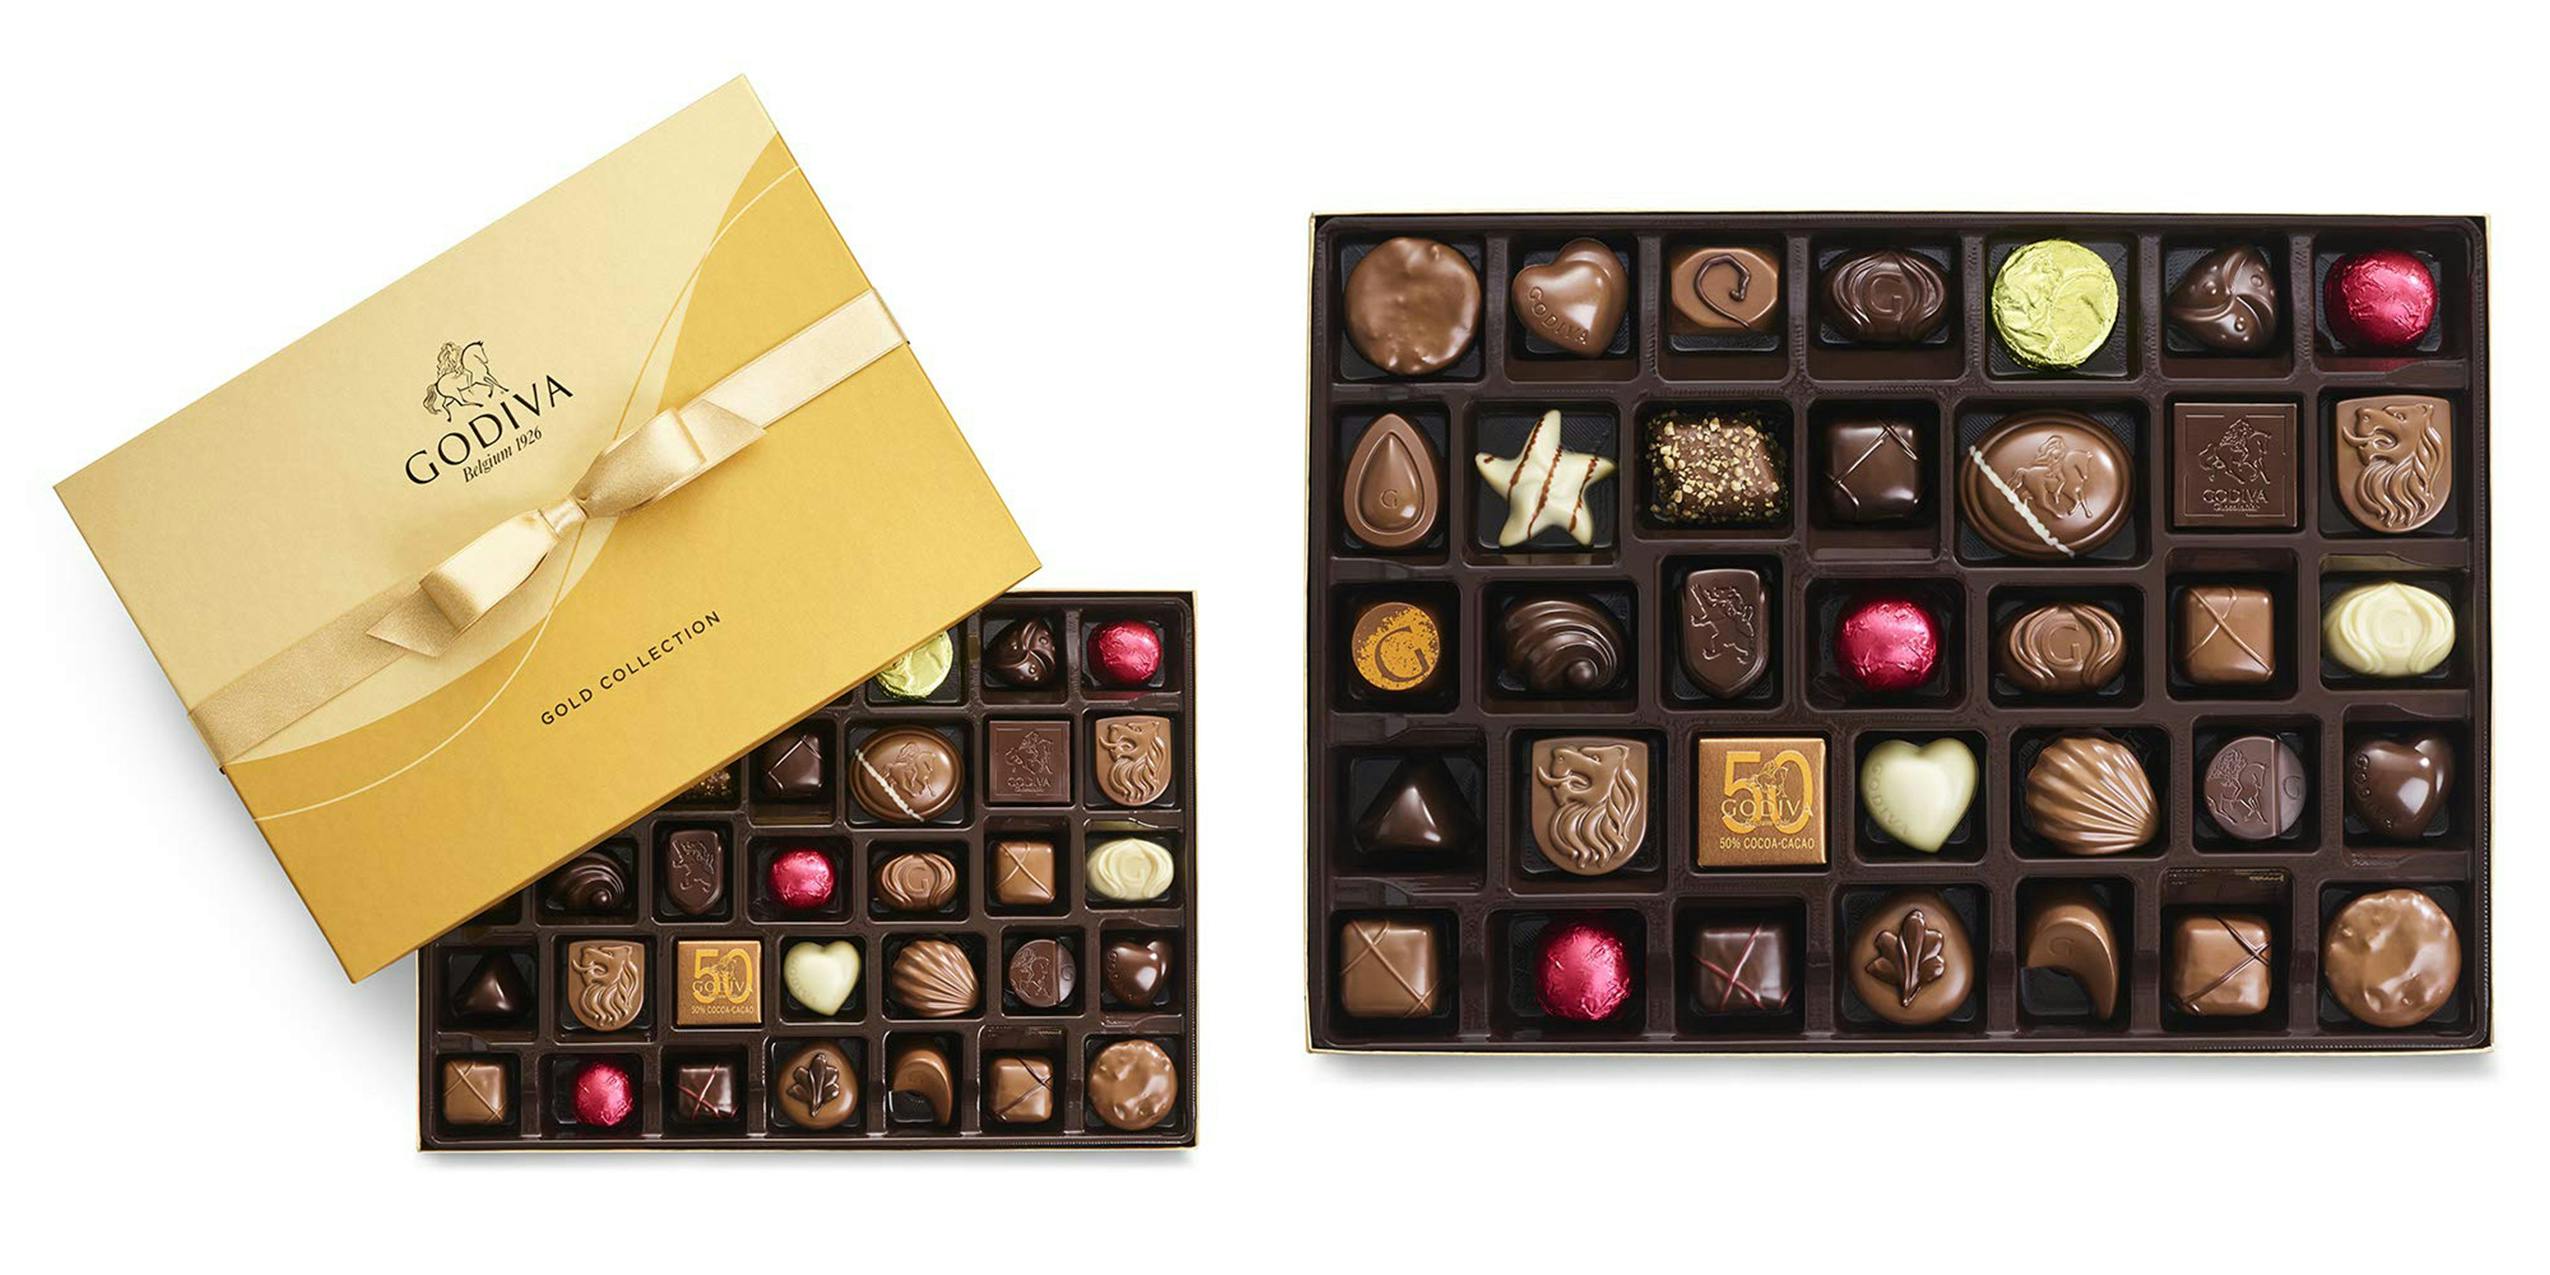 A Godiva Chocolate Box filled with 190 different luxury chocolates.